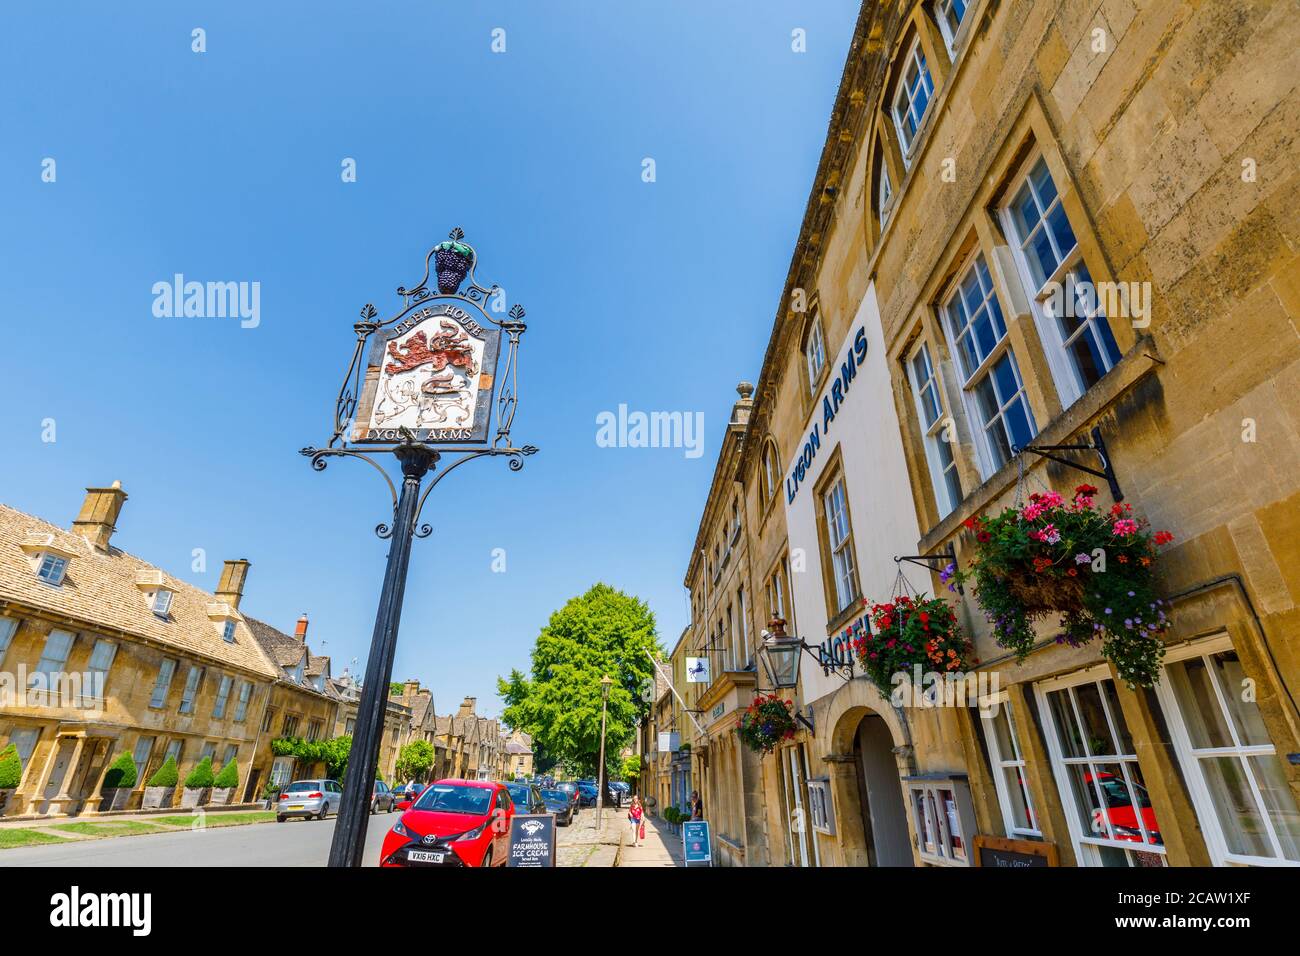 Roadside name sign of the Lygon Arms in High Street, Chipping Campden, a small market town in the Cotswolds in Gloucestershire Stock Photo